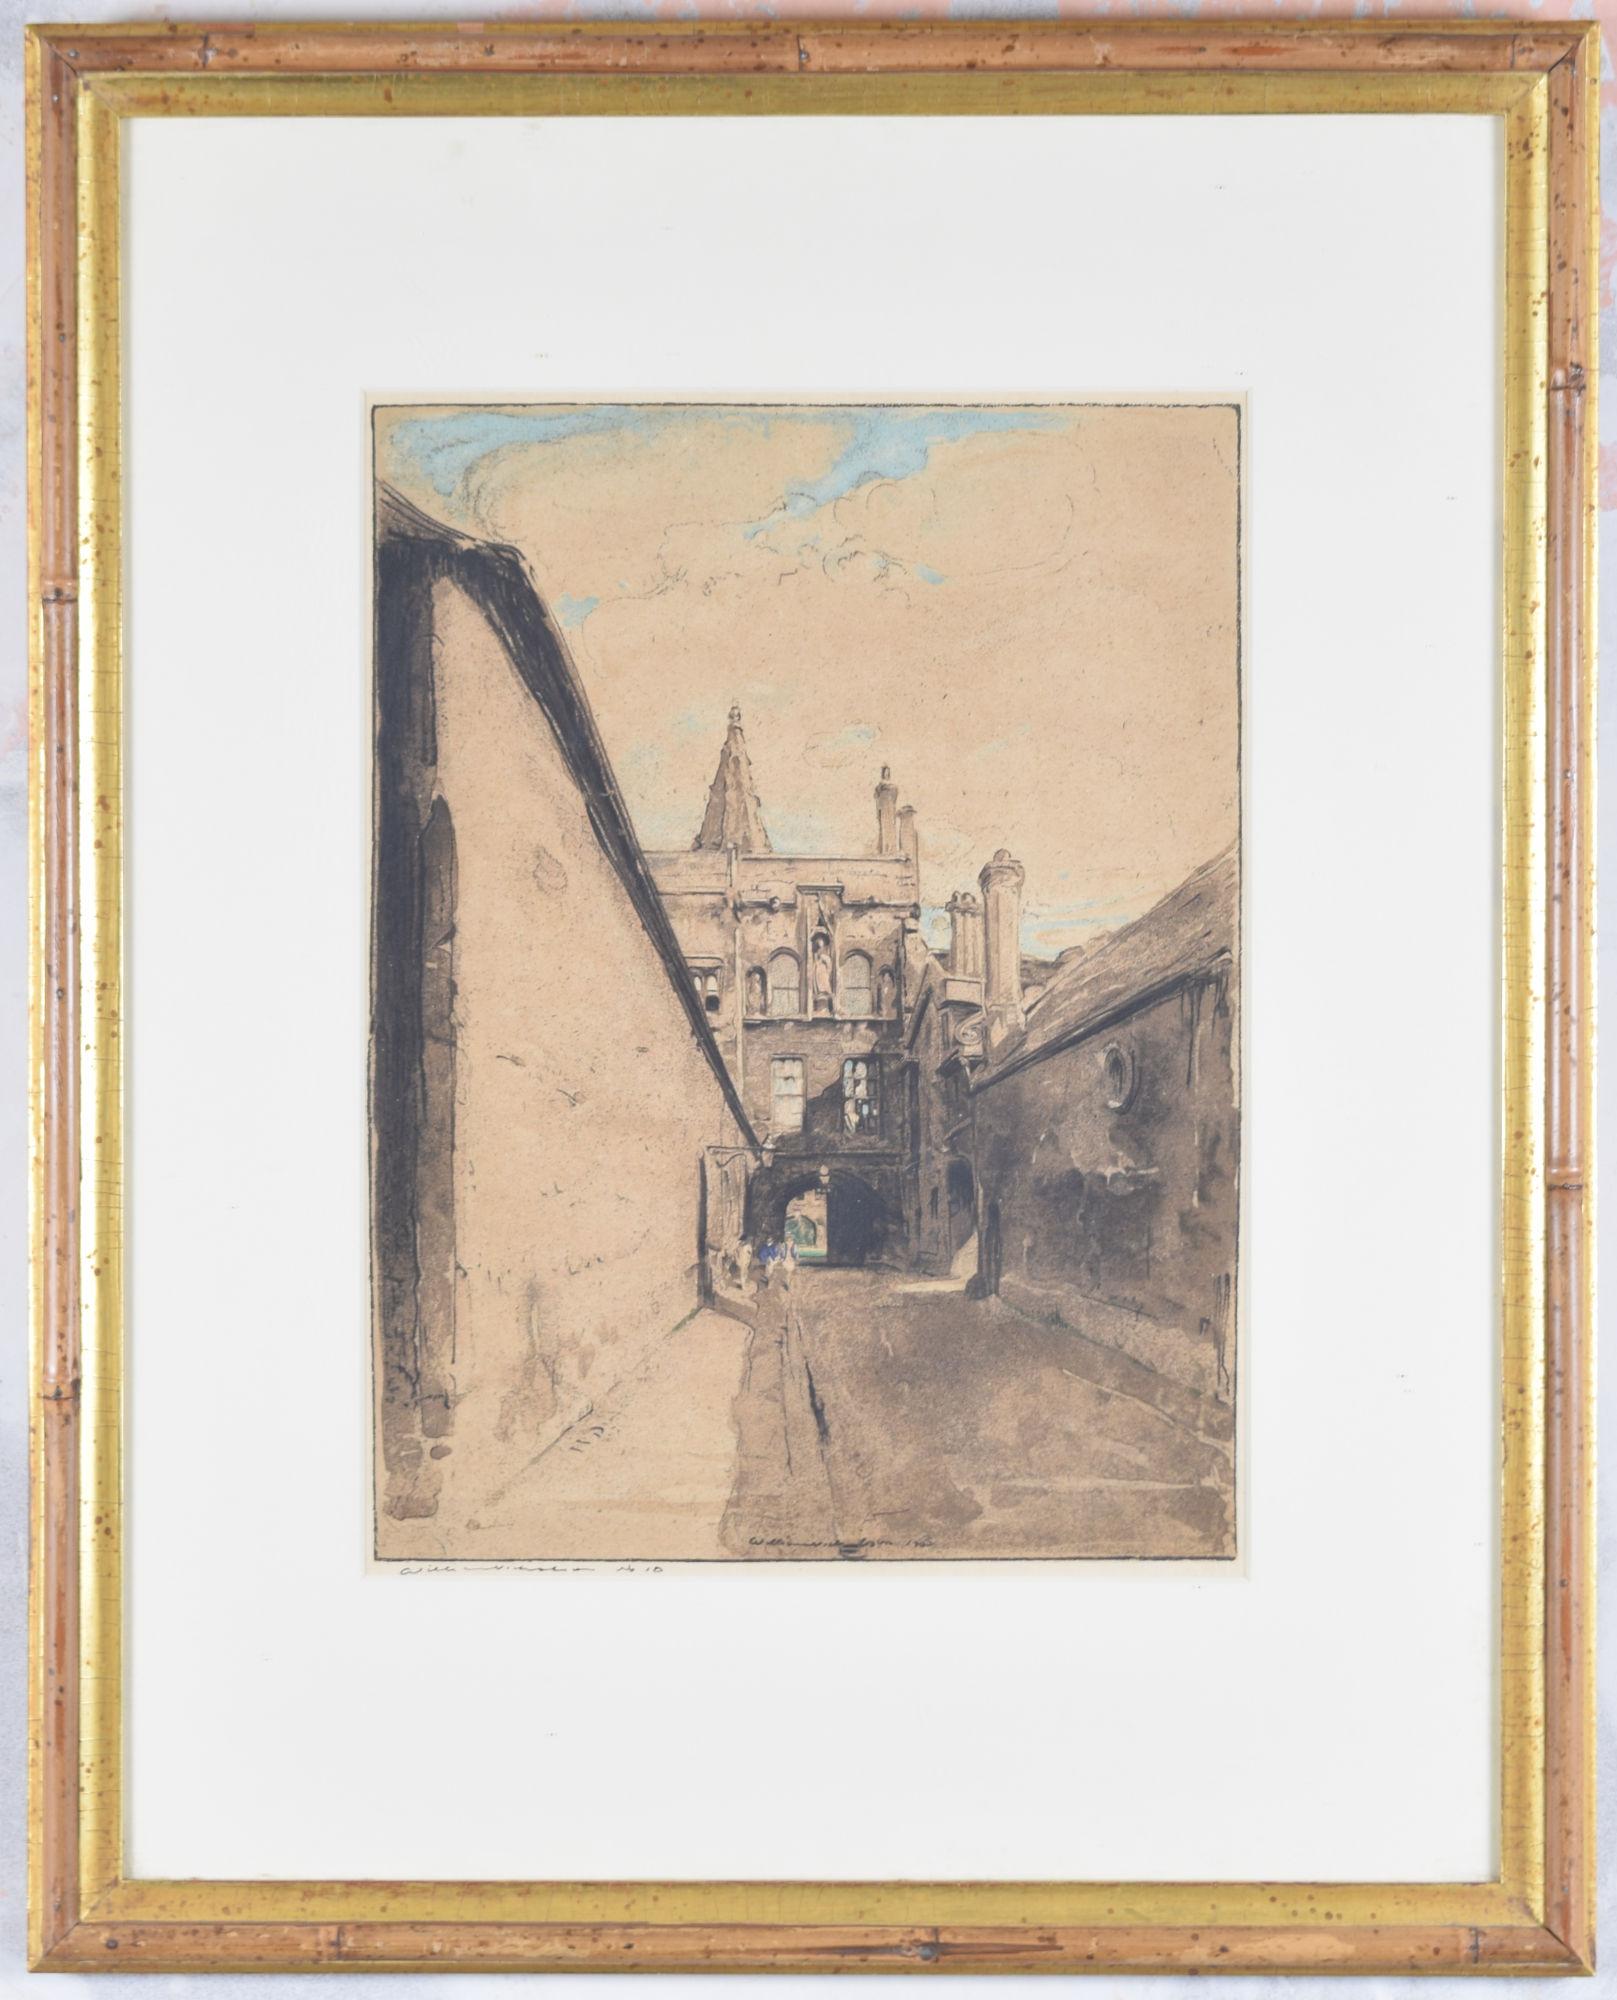 To see our other views of Oxford and Cambridge, scroll down to "More from this Seller" and below it click on "See all from this Seller" - or send us a message if you cannot find the view you want.

William Nicholson (1872 - 1949)
New College Lane,